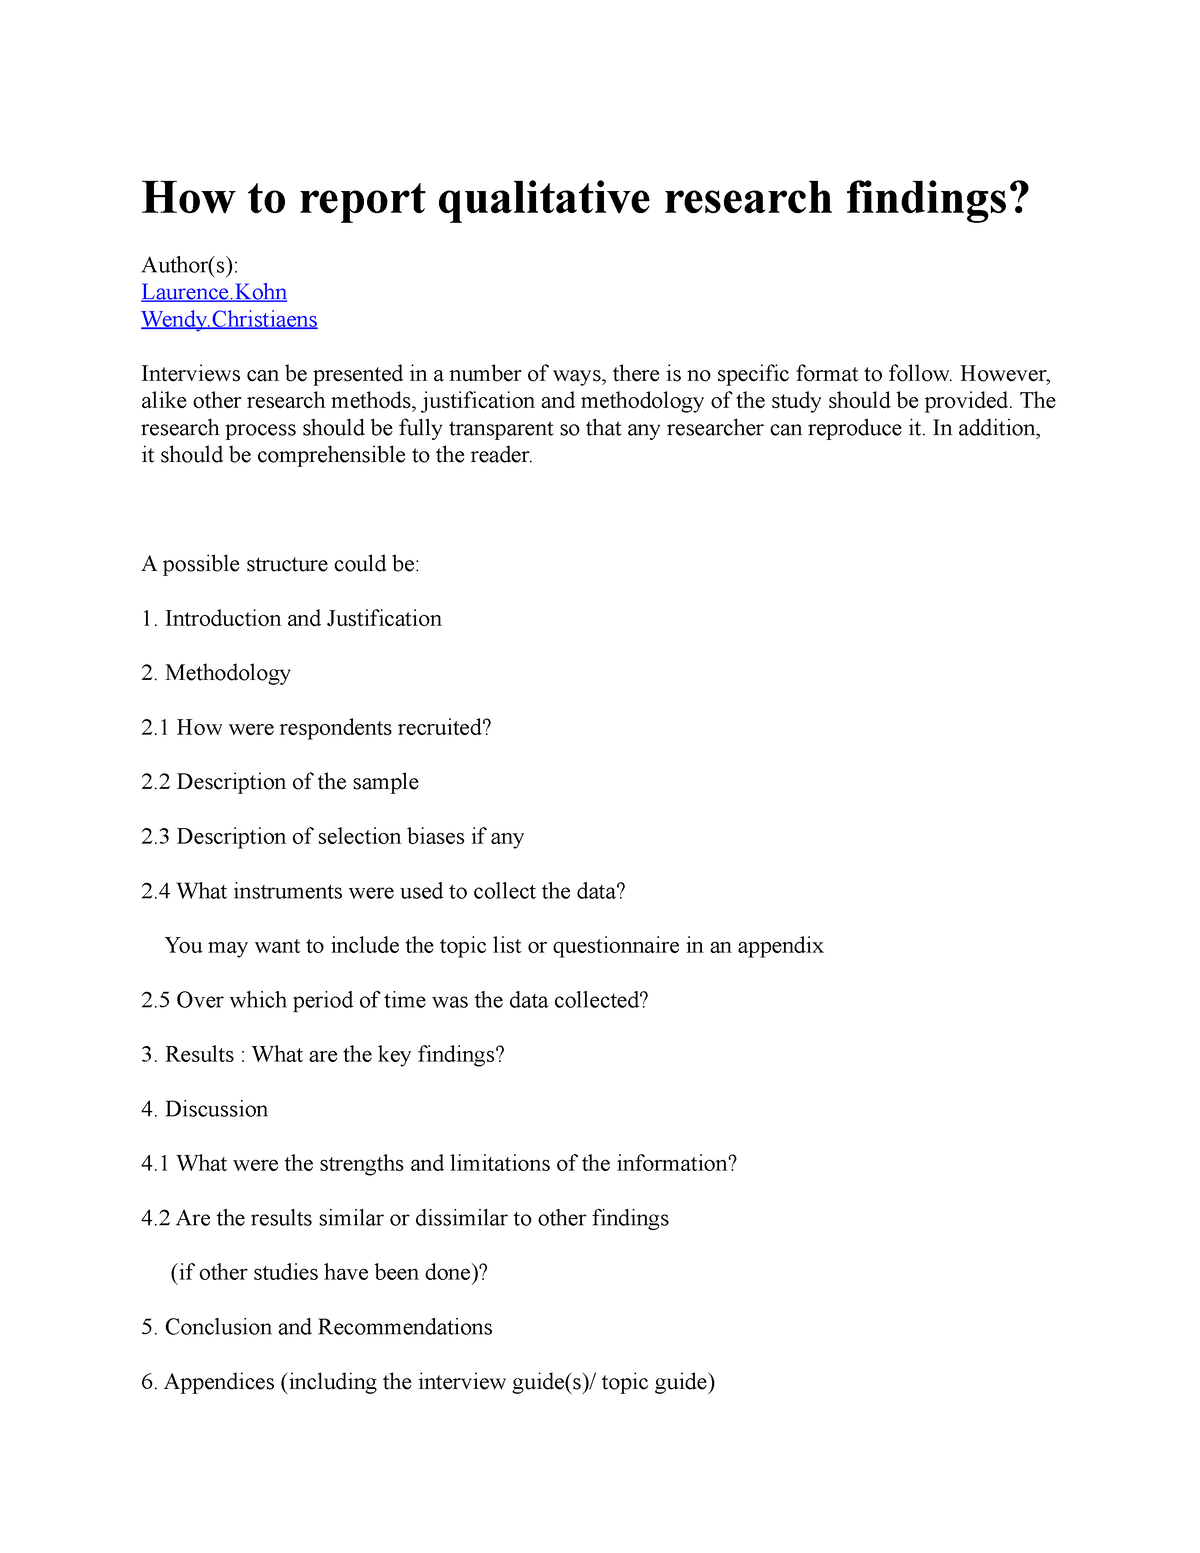 how to discuss qualitative research findings